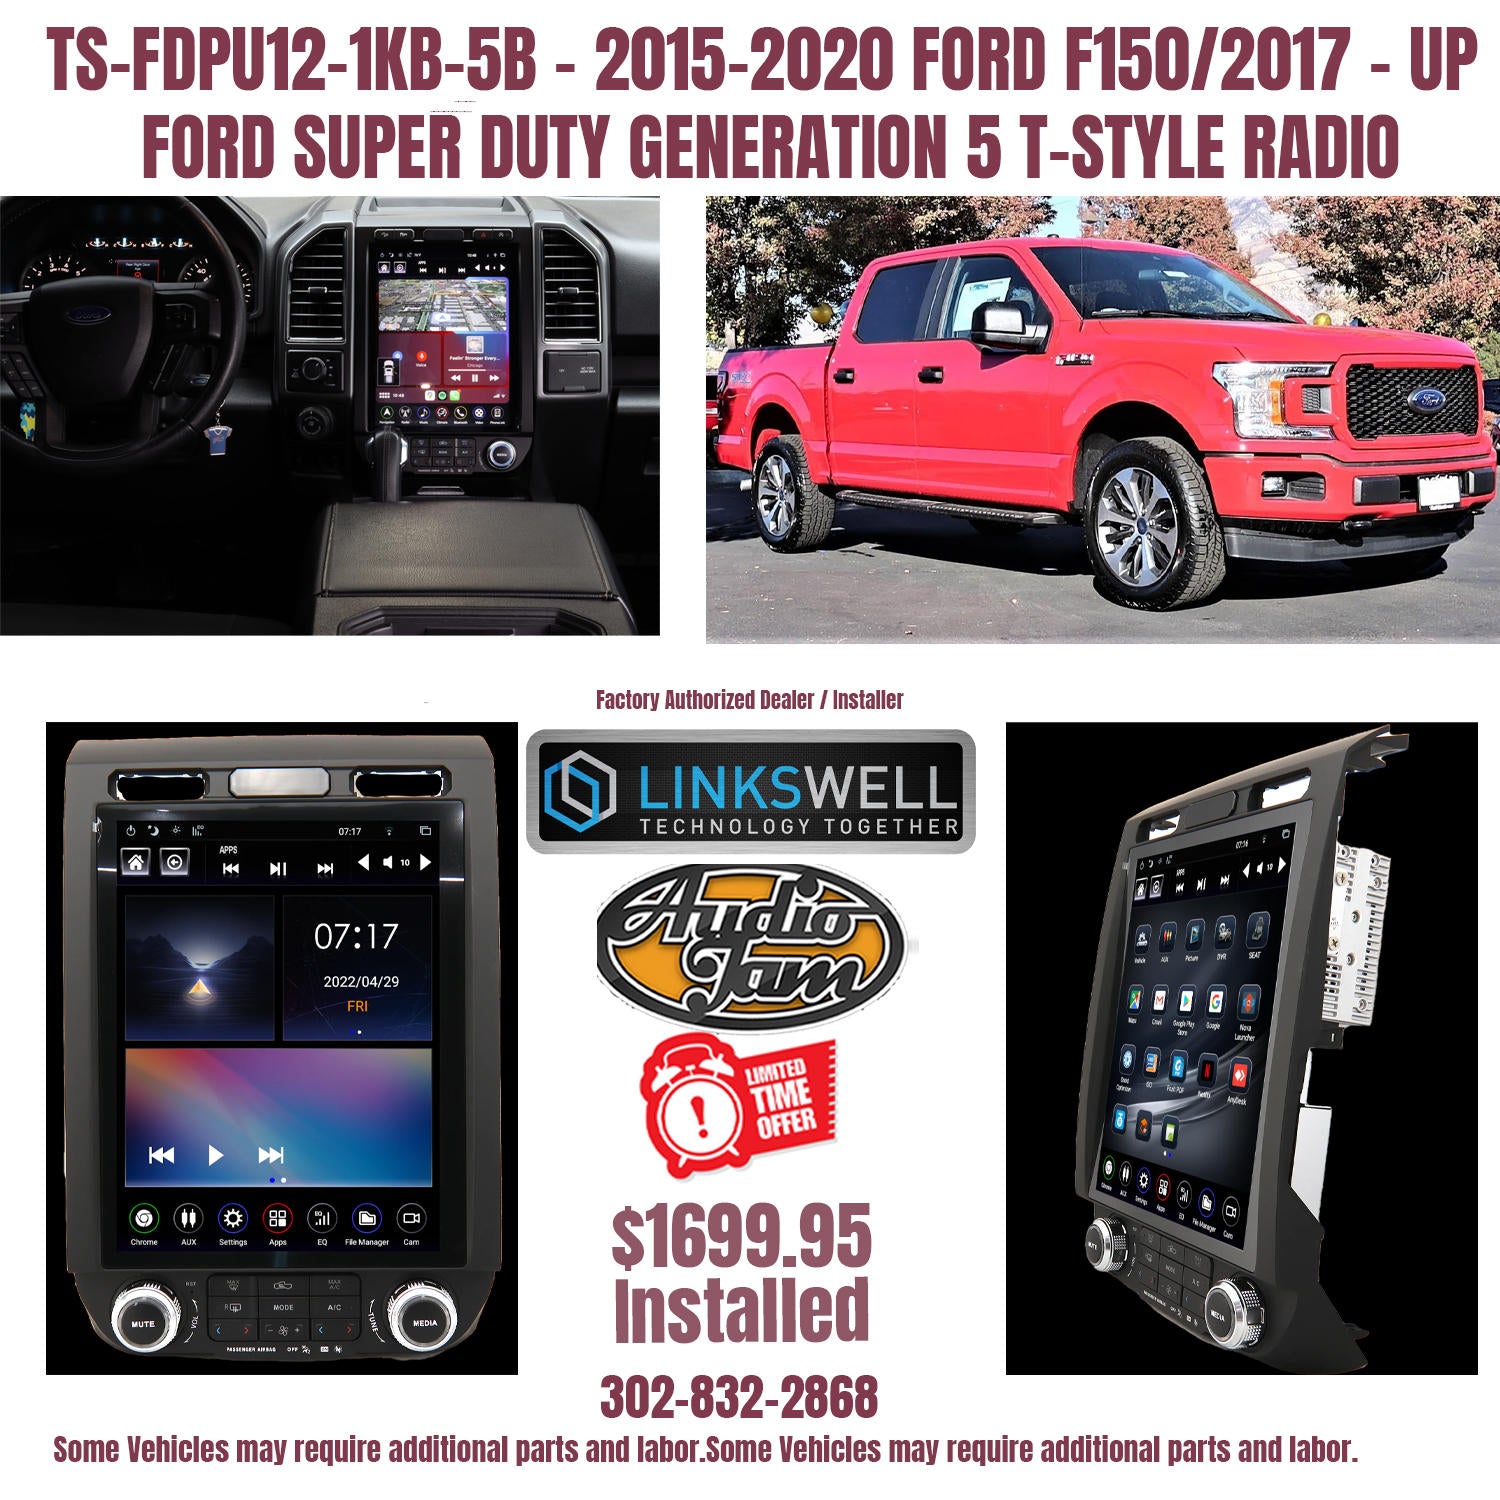 Linkswell Generation 5 T-Style 12.1″ HD touch screen Radio for the 15-20 F-150 & 17-up Super Duty